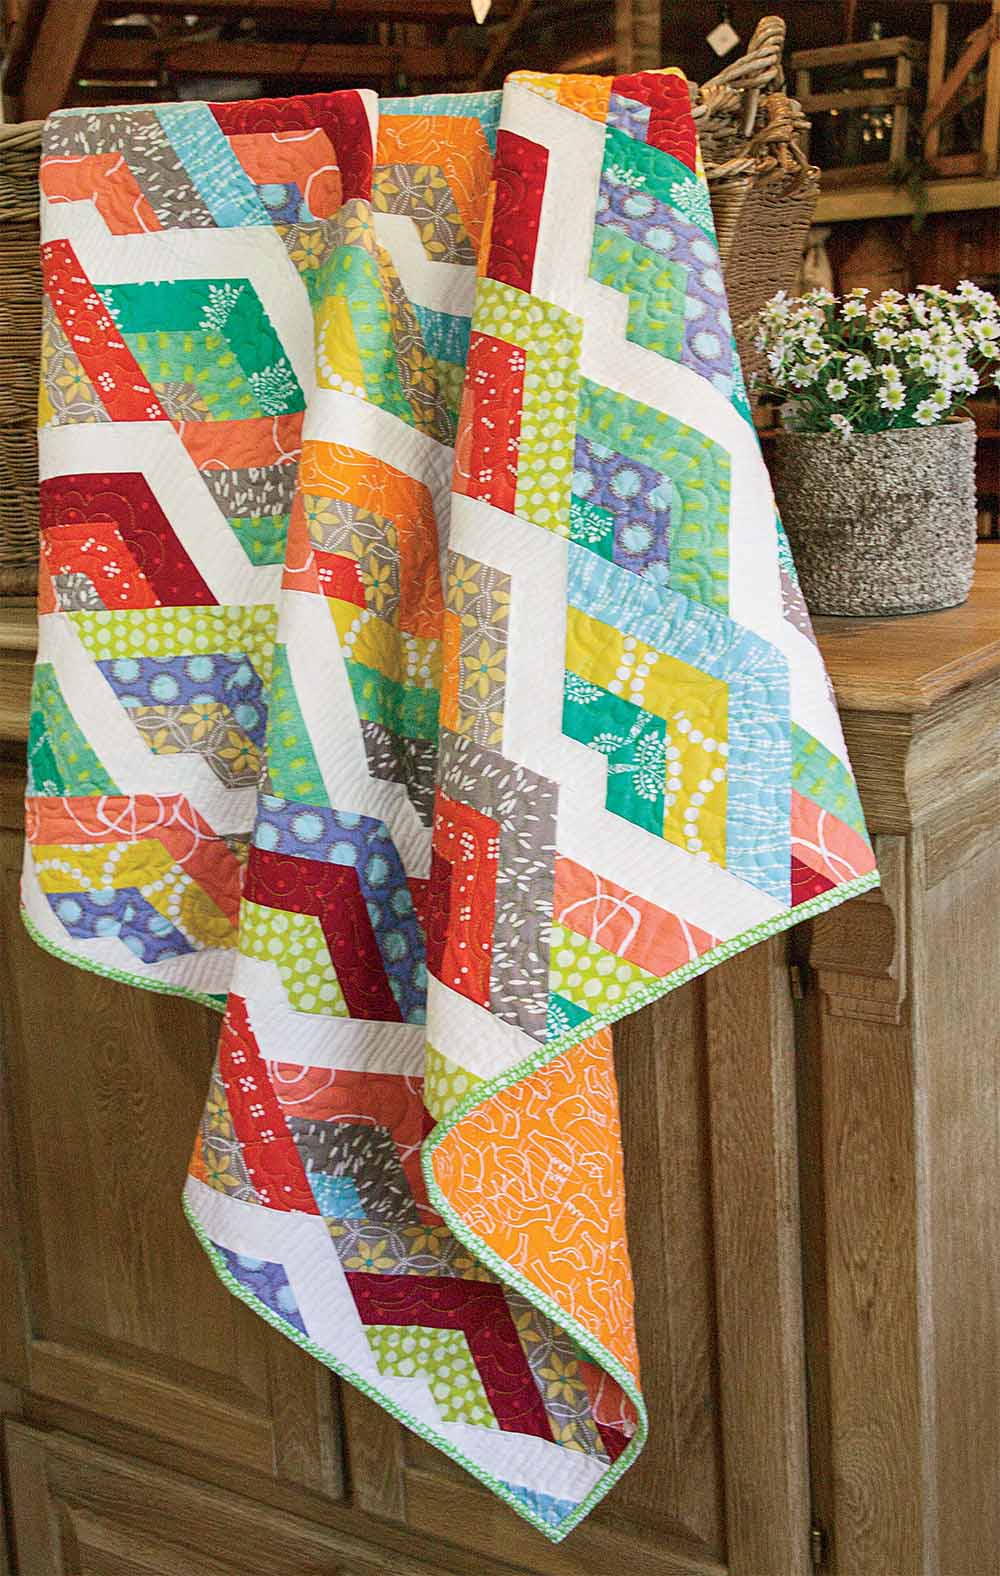 Workshop Wednesday Fantastic Fat Quarter Quilts Quilting Daily,Sumac Tree Bark